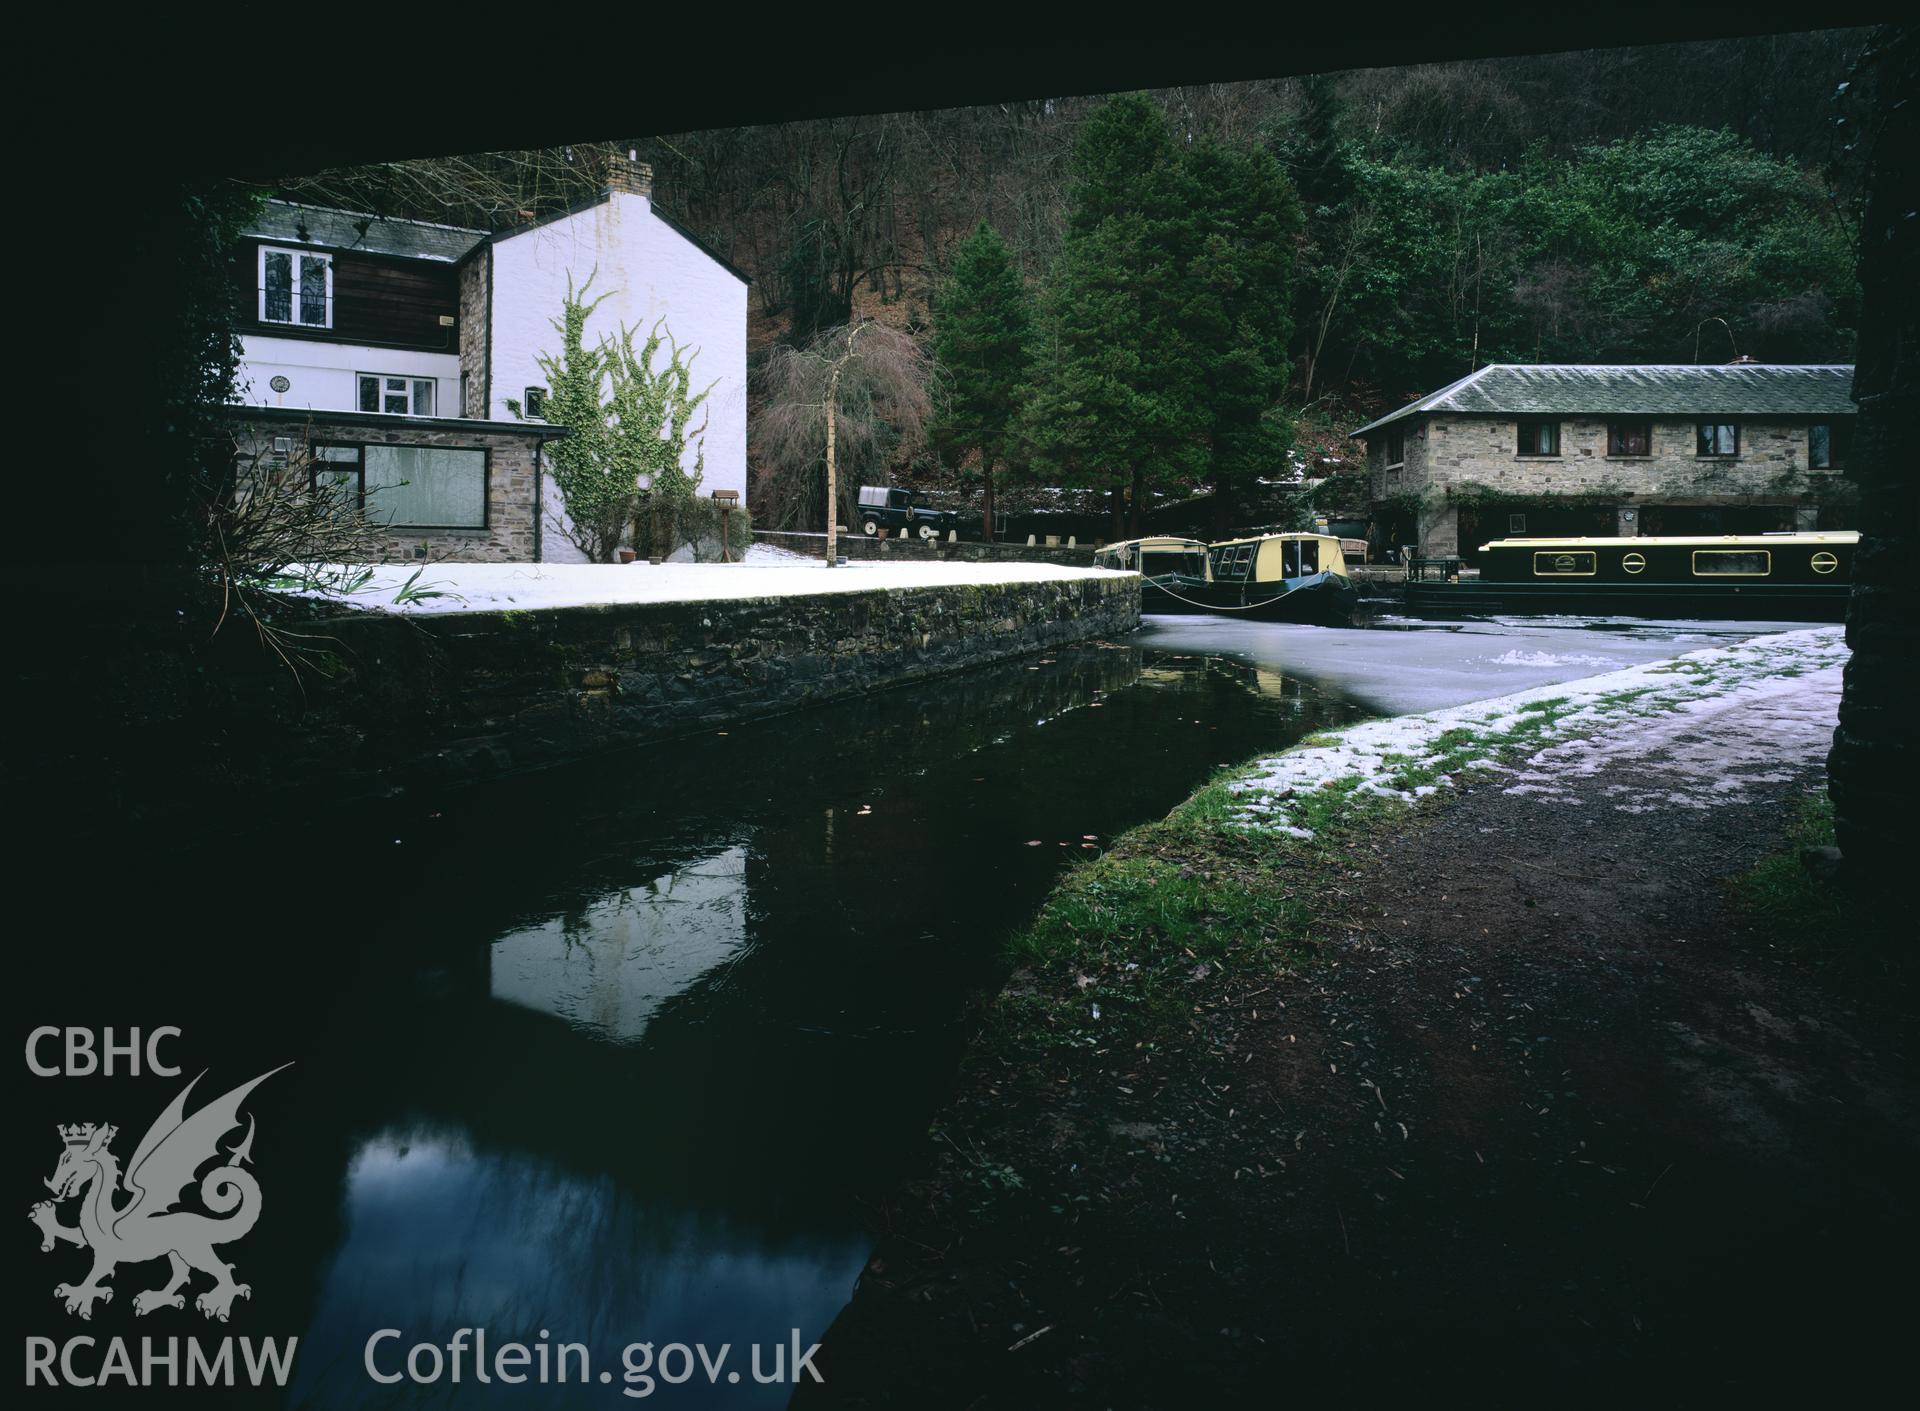 RCAHMW colour transparency showing Llanfoist Wharf, taken by I.N. Wright, March 2004.